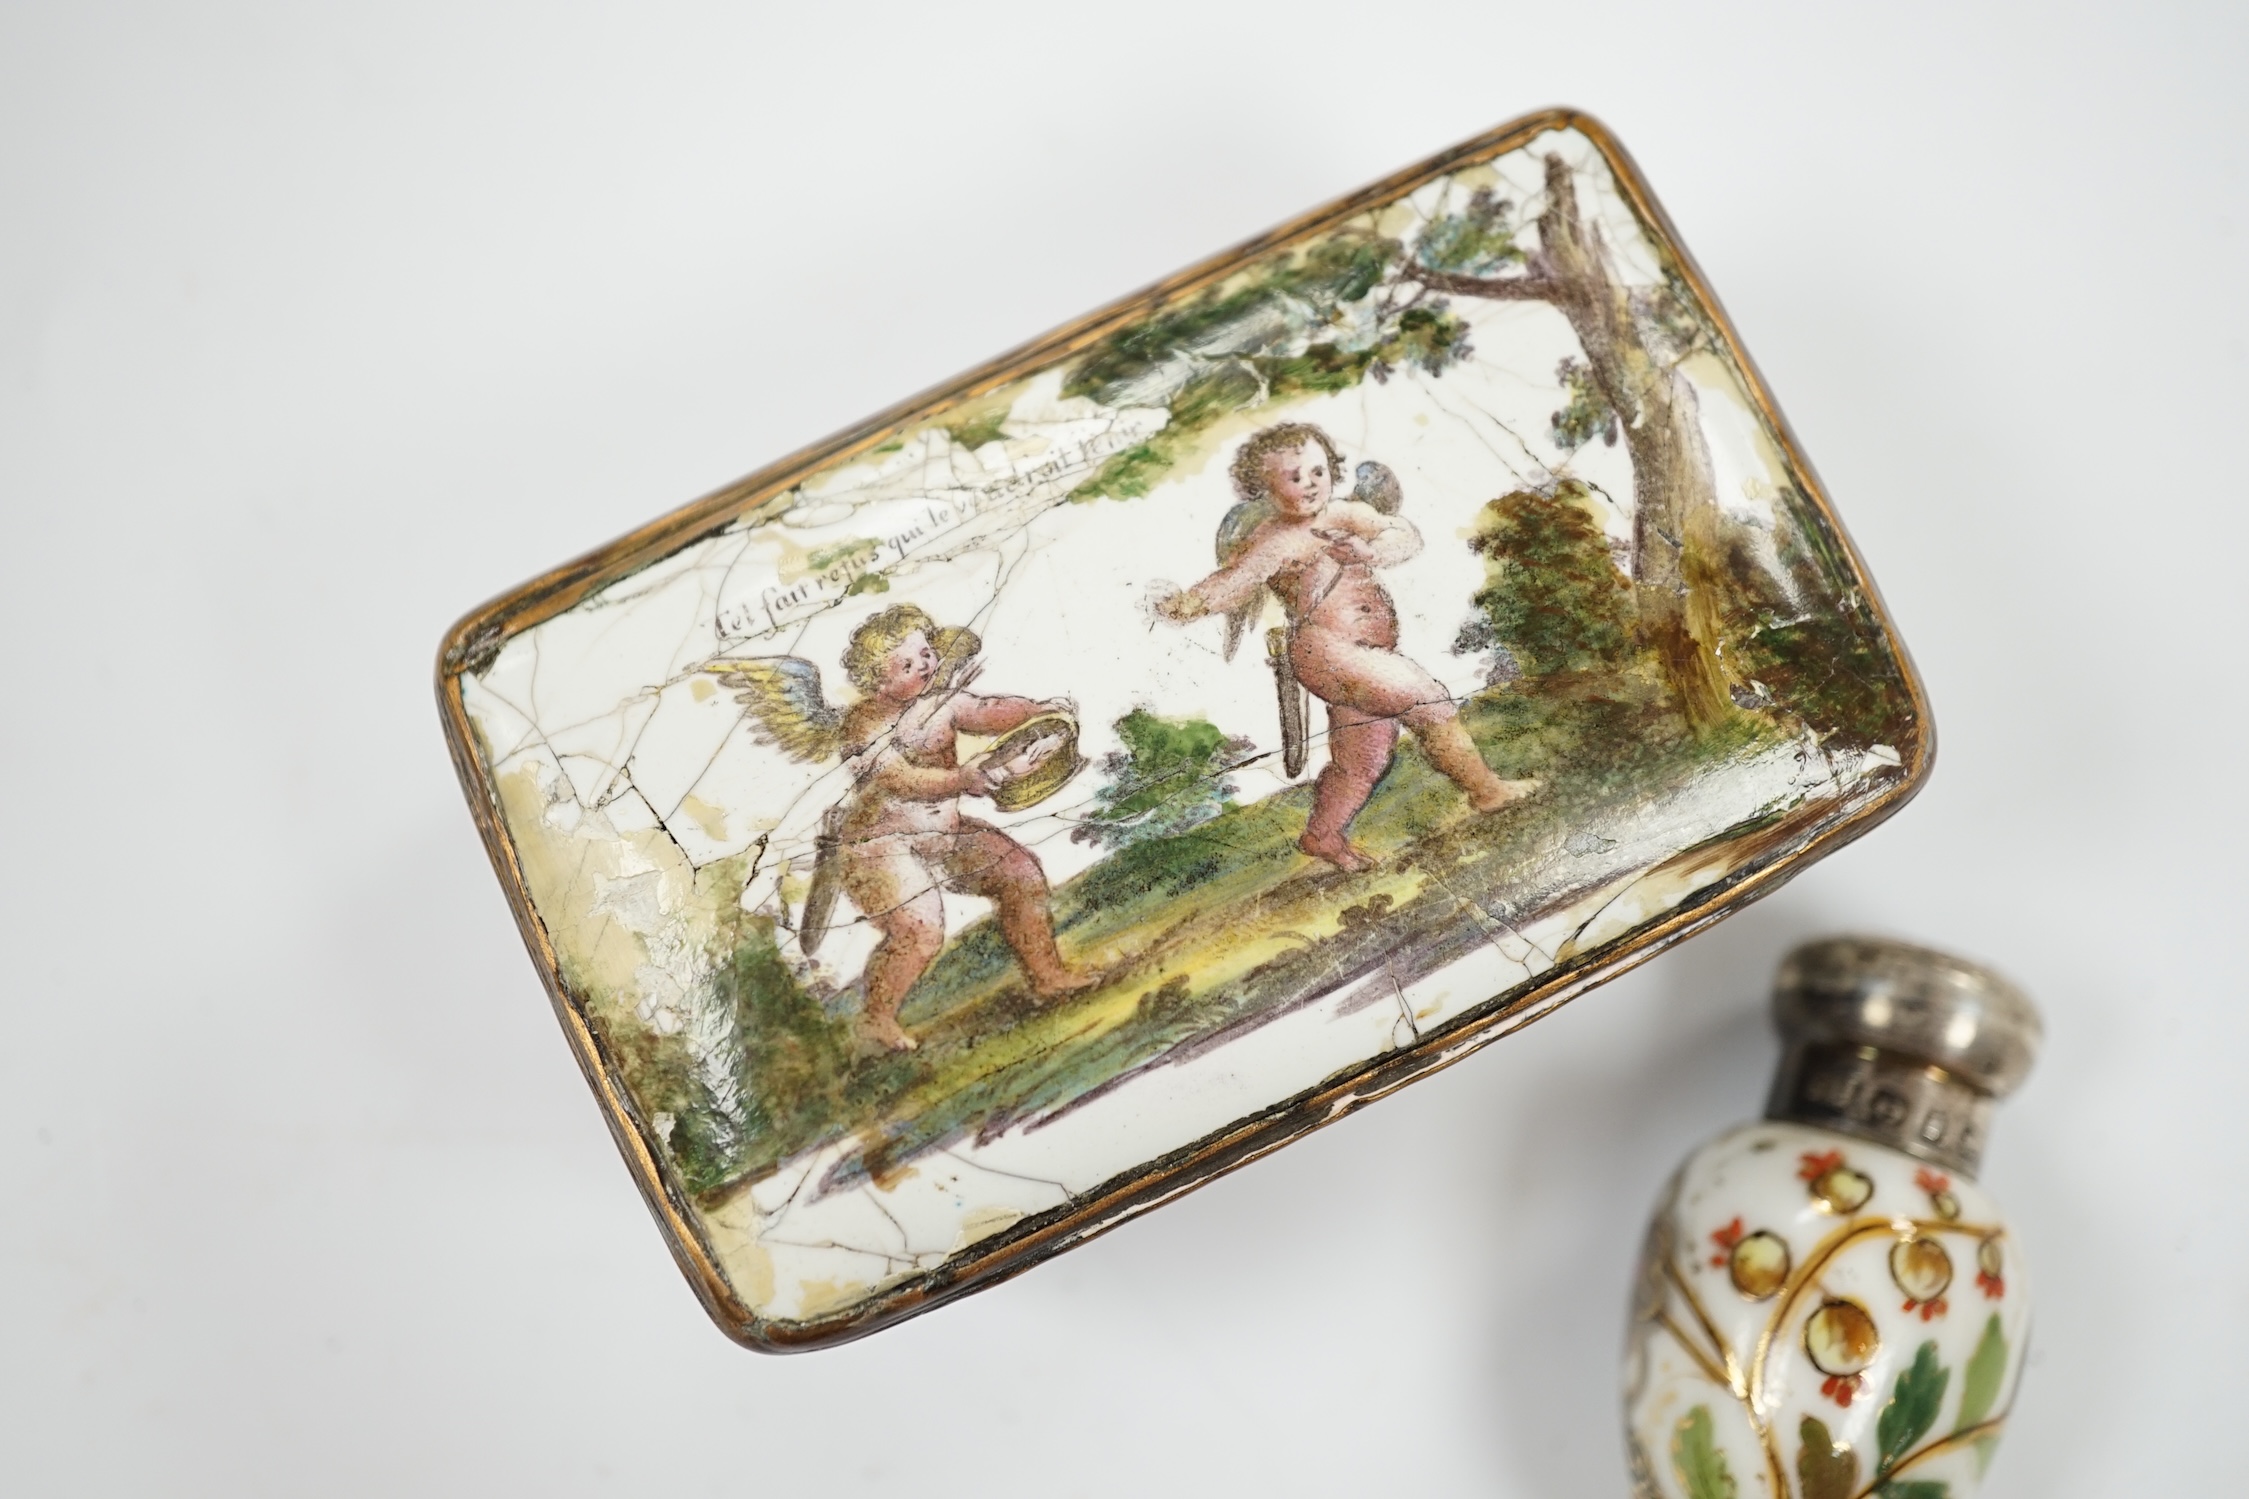 An 18th century French enamel snuff box and a late 19th century silver mounted porcelain scent bottle, largest 7.5cm. Condition - box poor, scent bottle fair